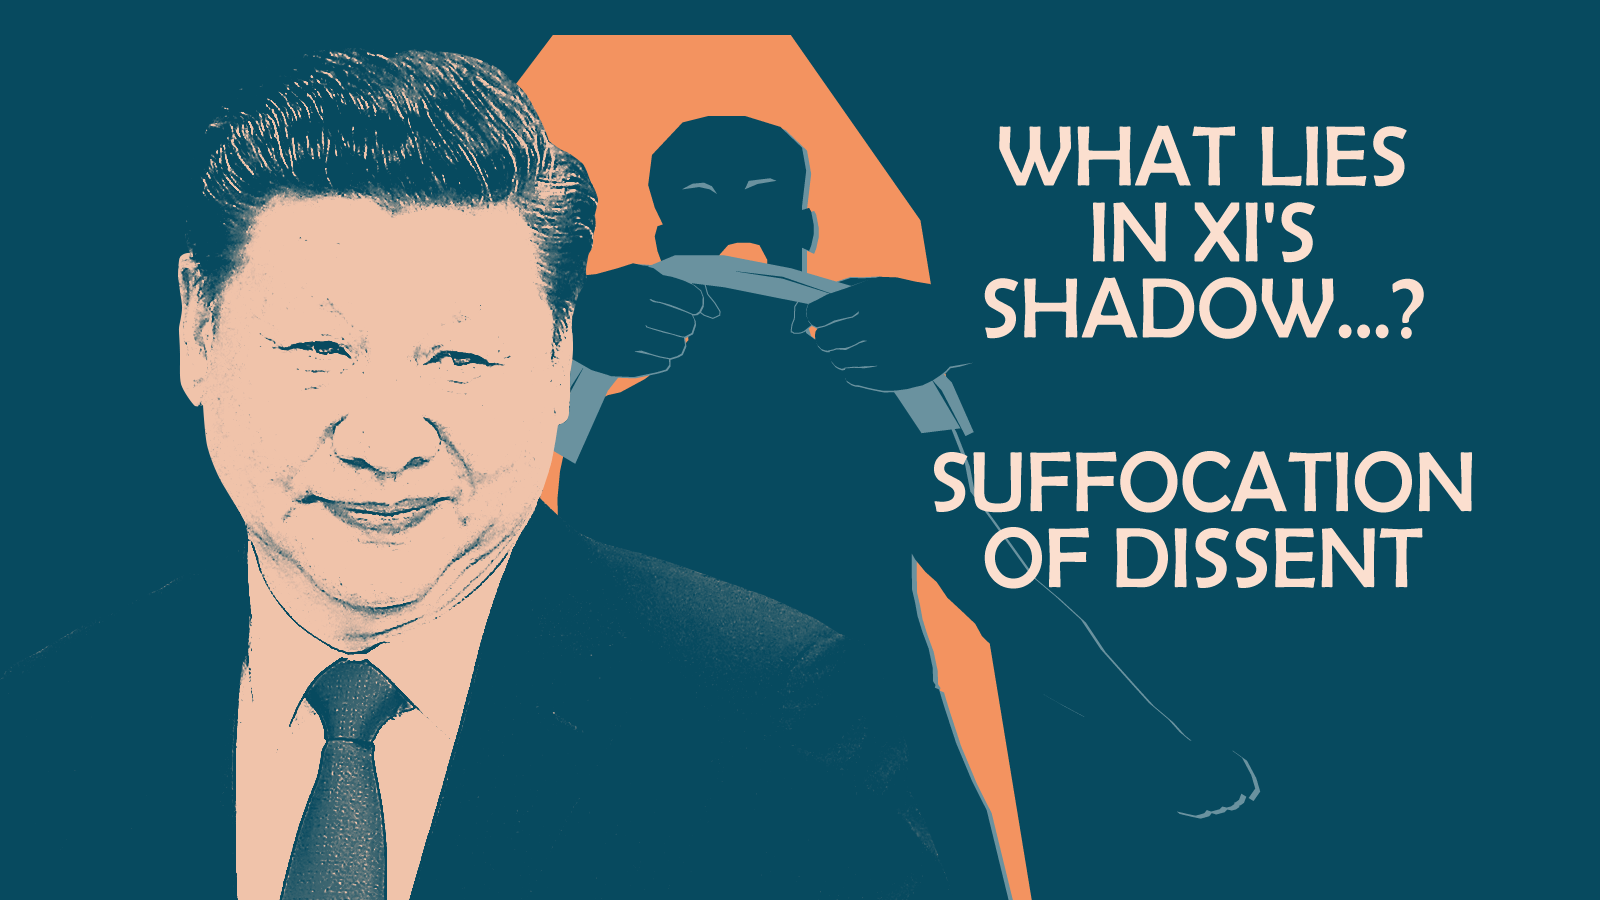 Xi Jinping - Constrictor of dissent